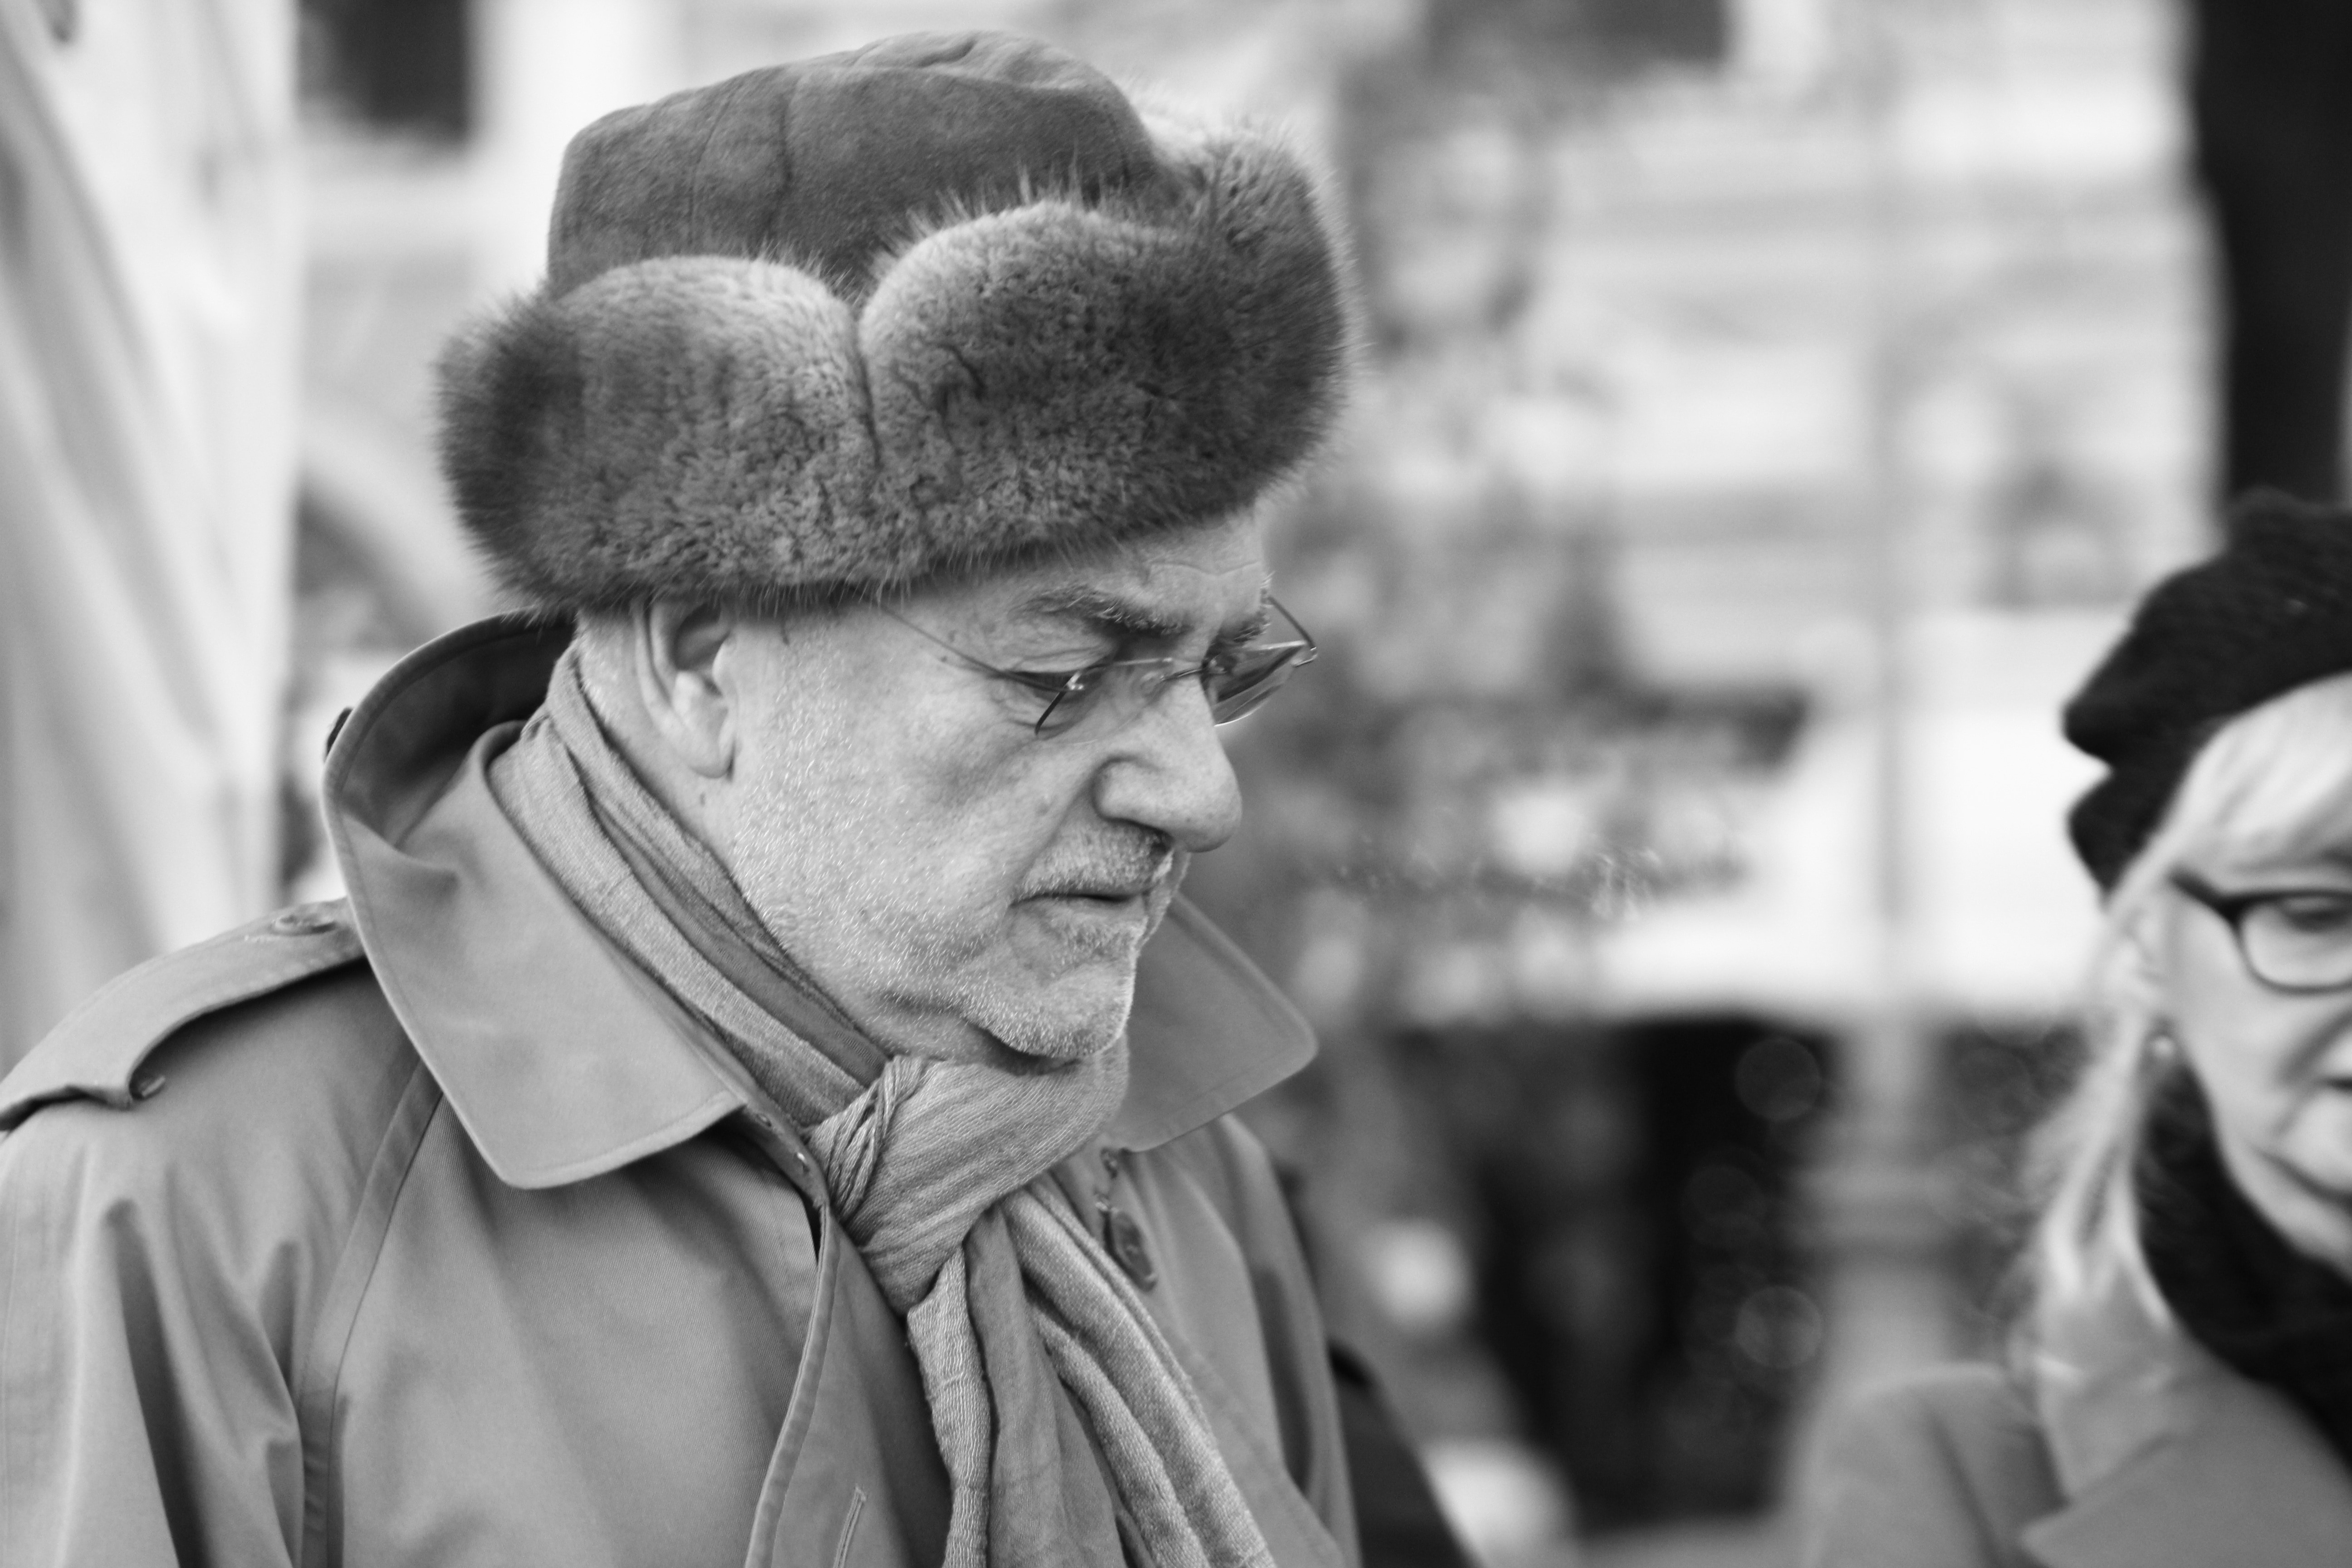 grayscale photo of man with winter hat and coat